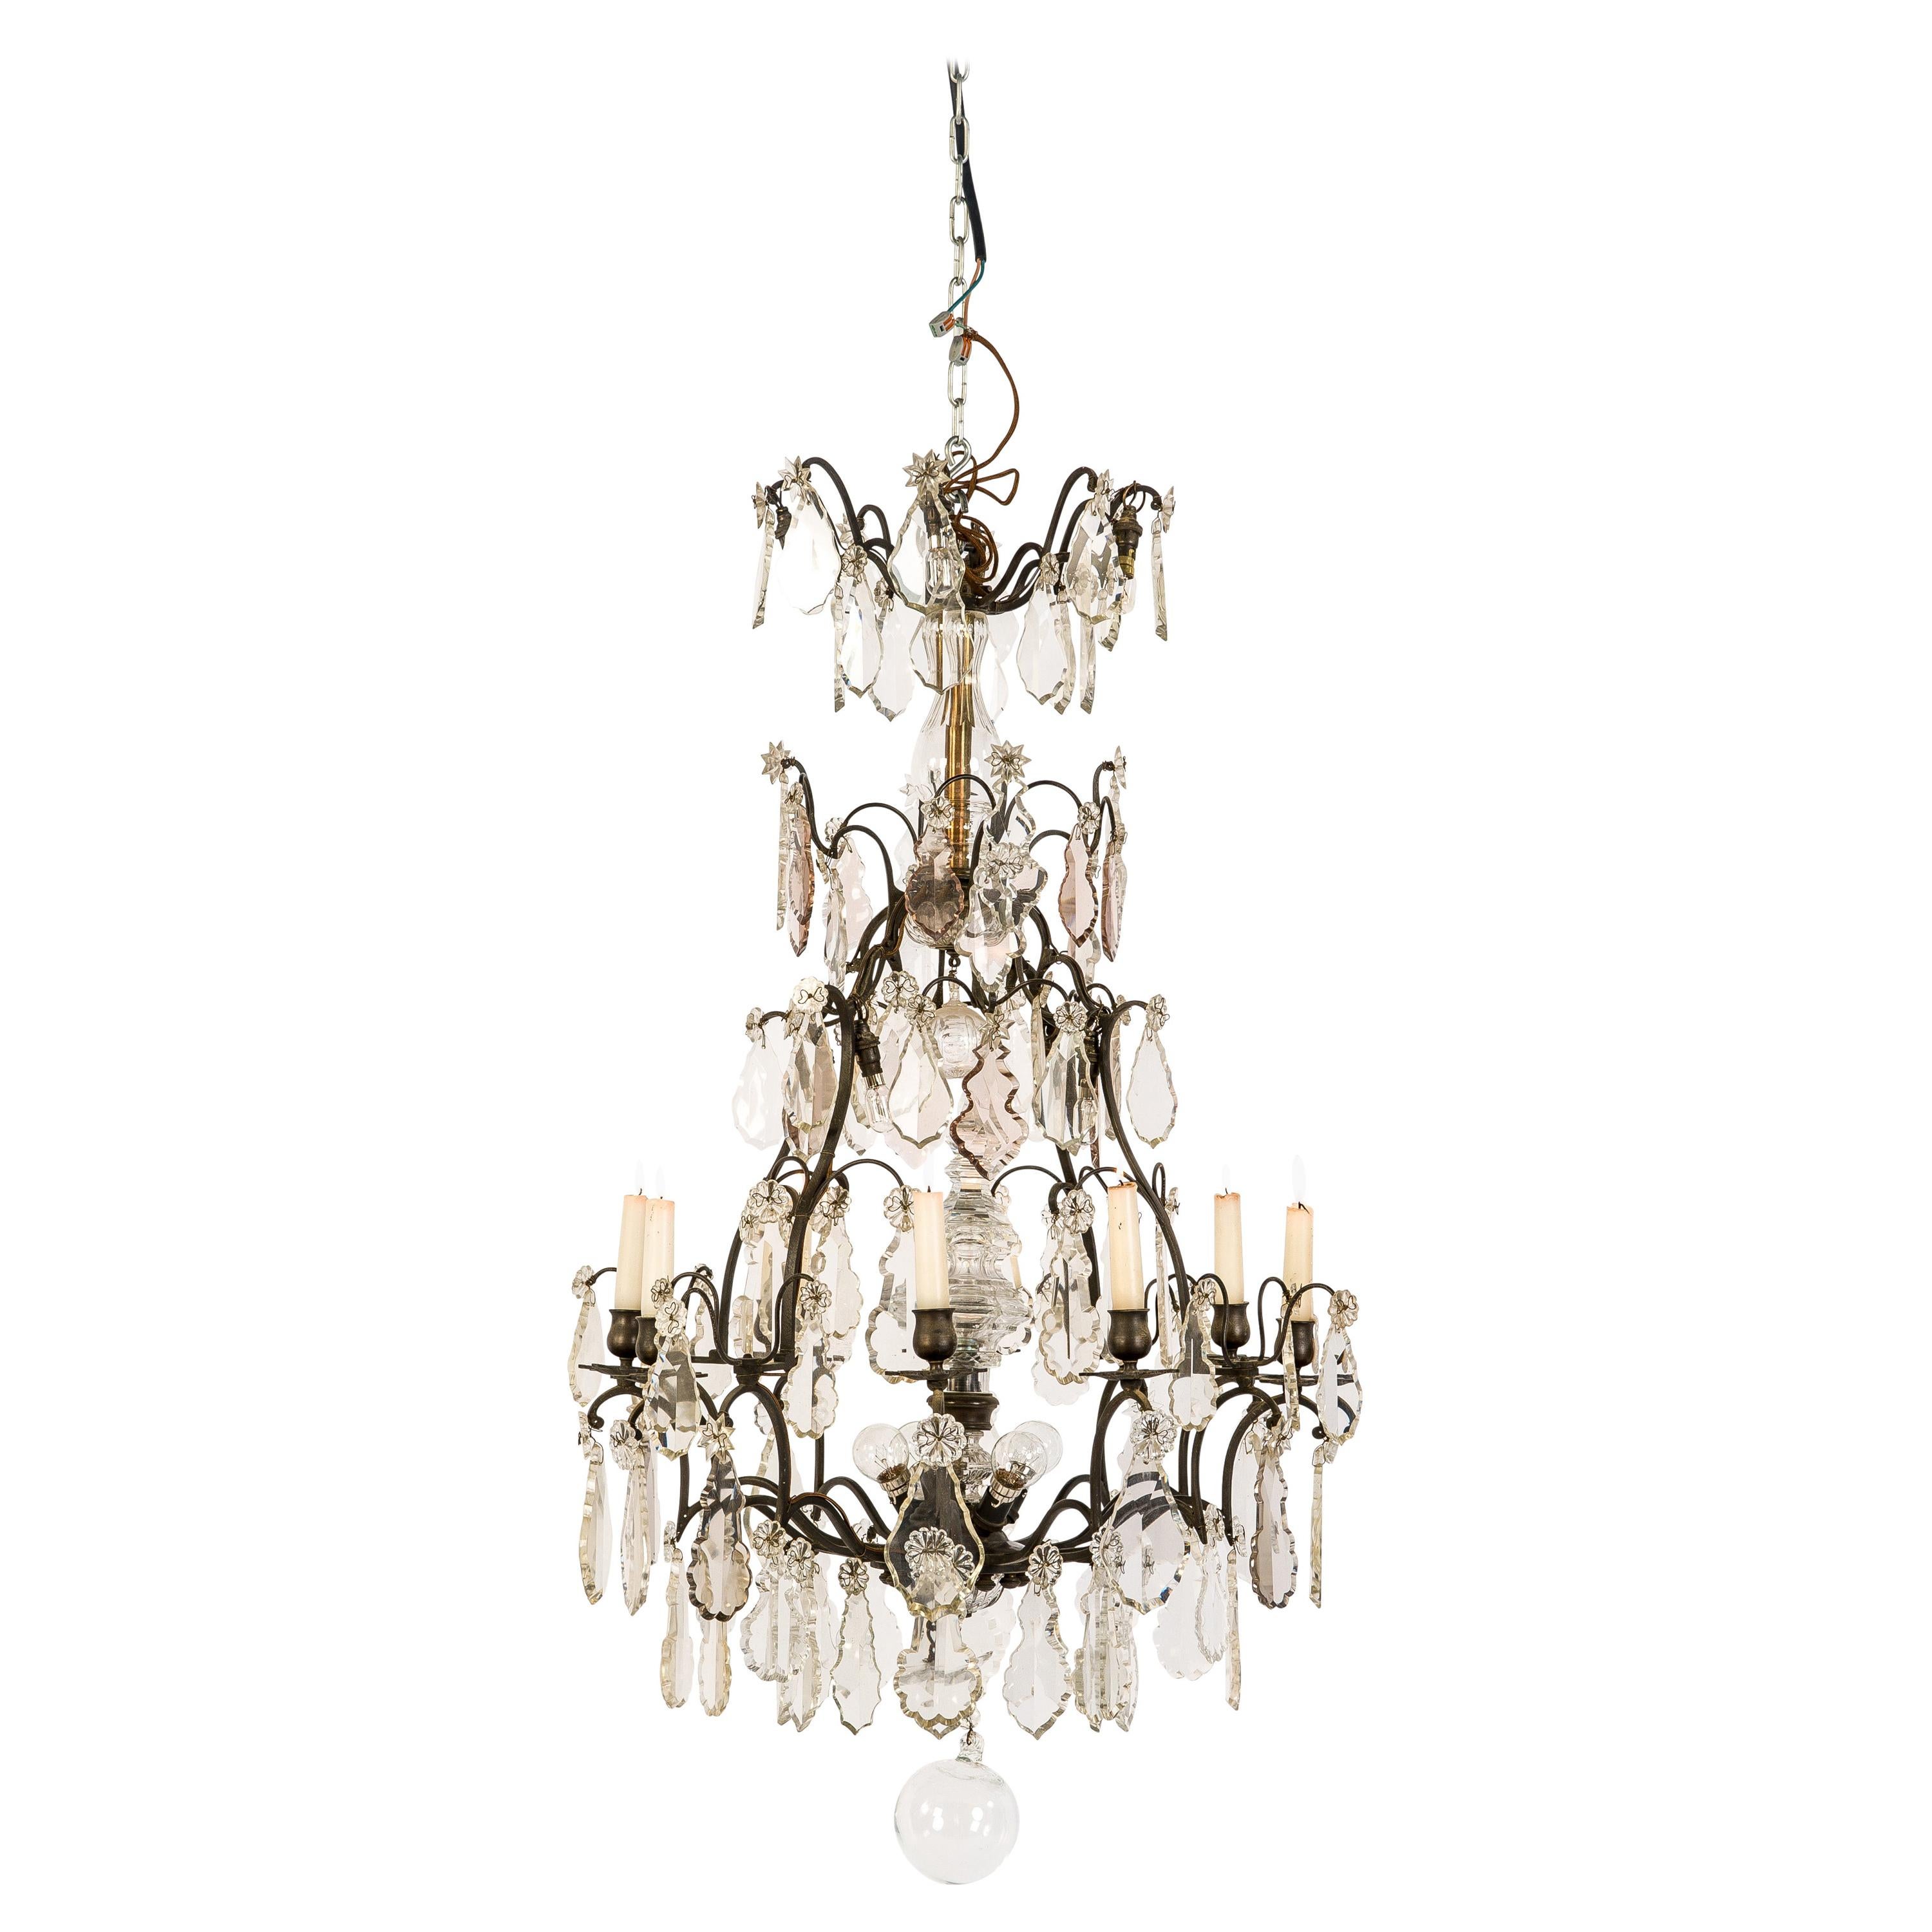 19th Century Bronze Chandelier with Cut Crystal Ornaments and Candles and Lights